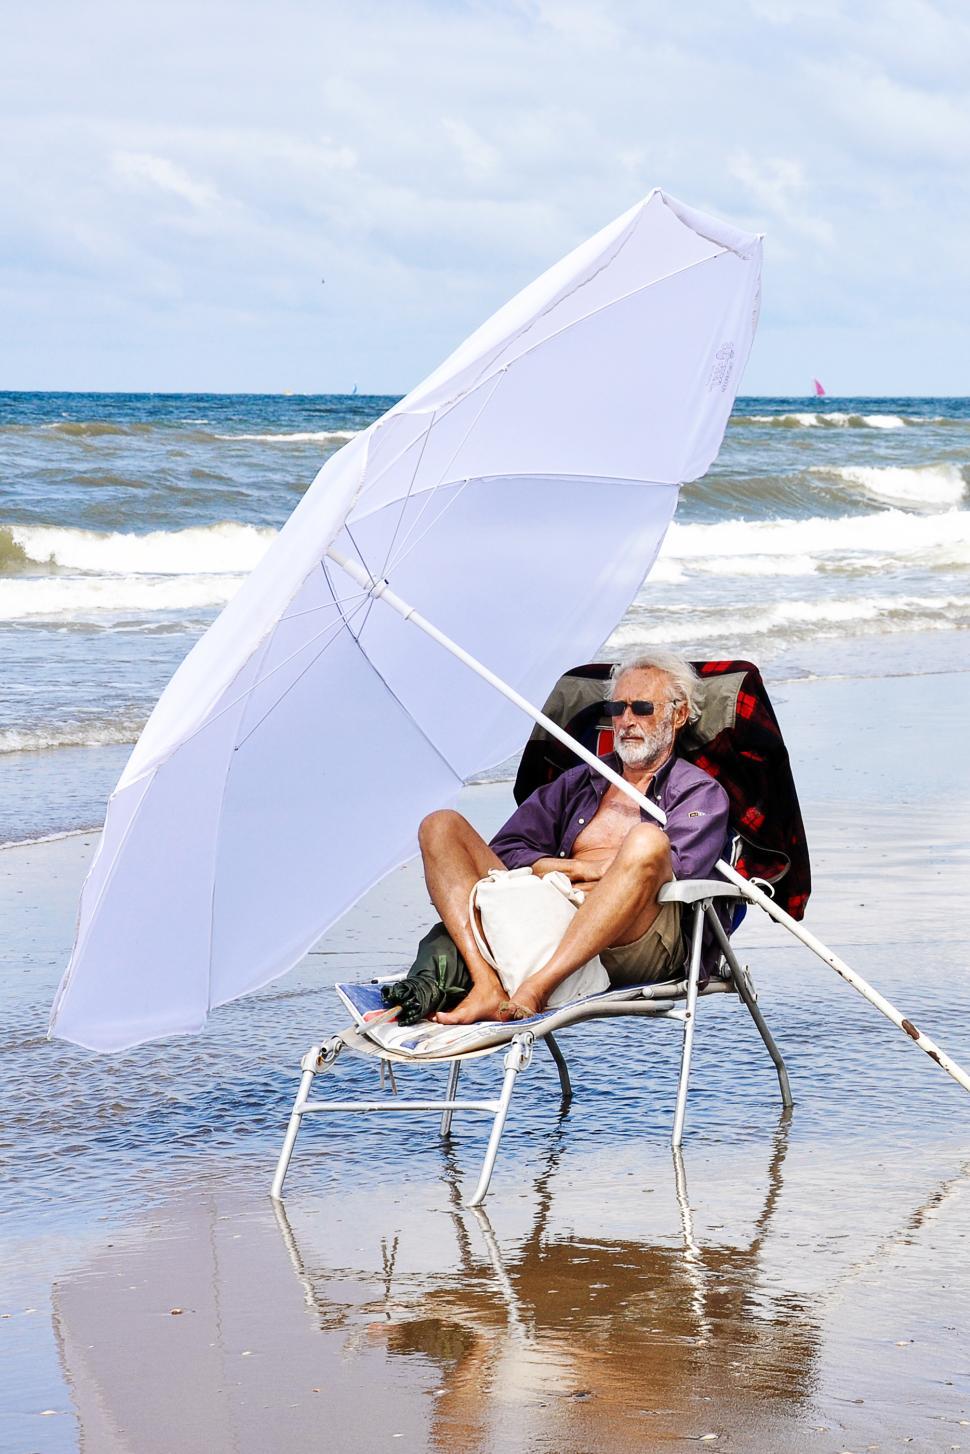 Free Image of Man relaxing on beach 